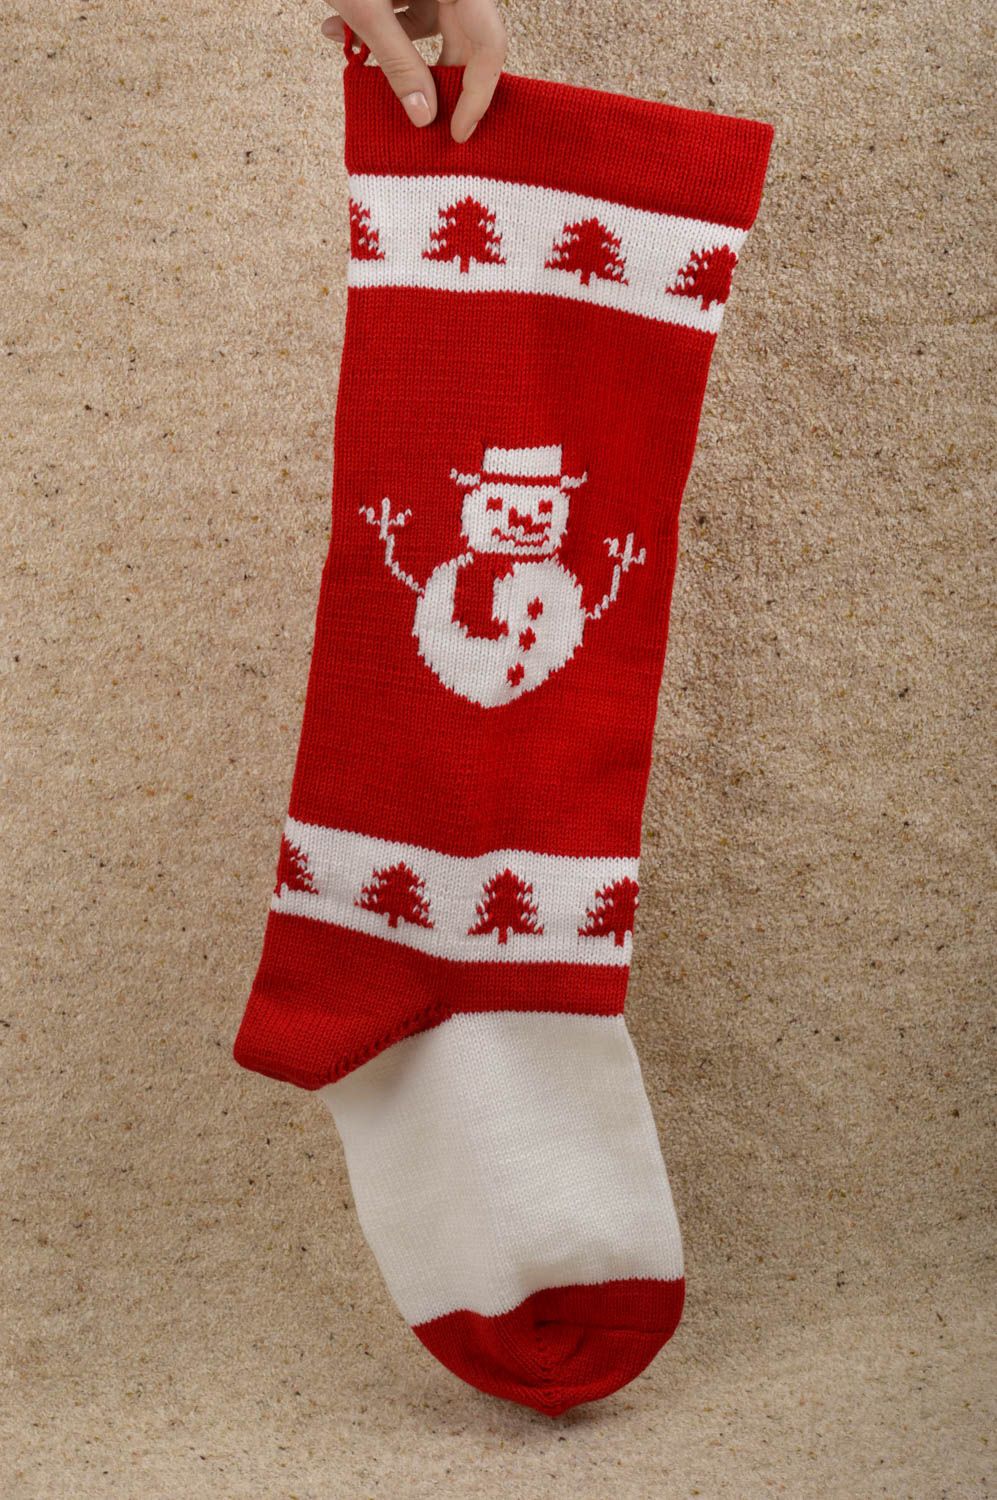 Lovely handmade sock beautiful red accessories unusual Christmas decor photo 1